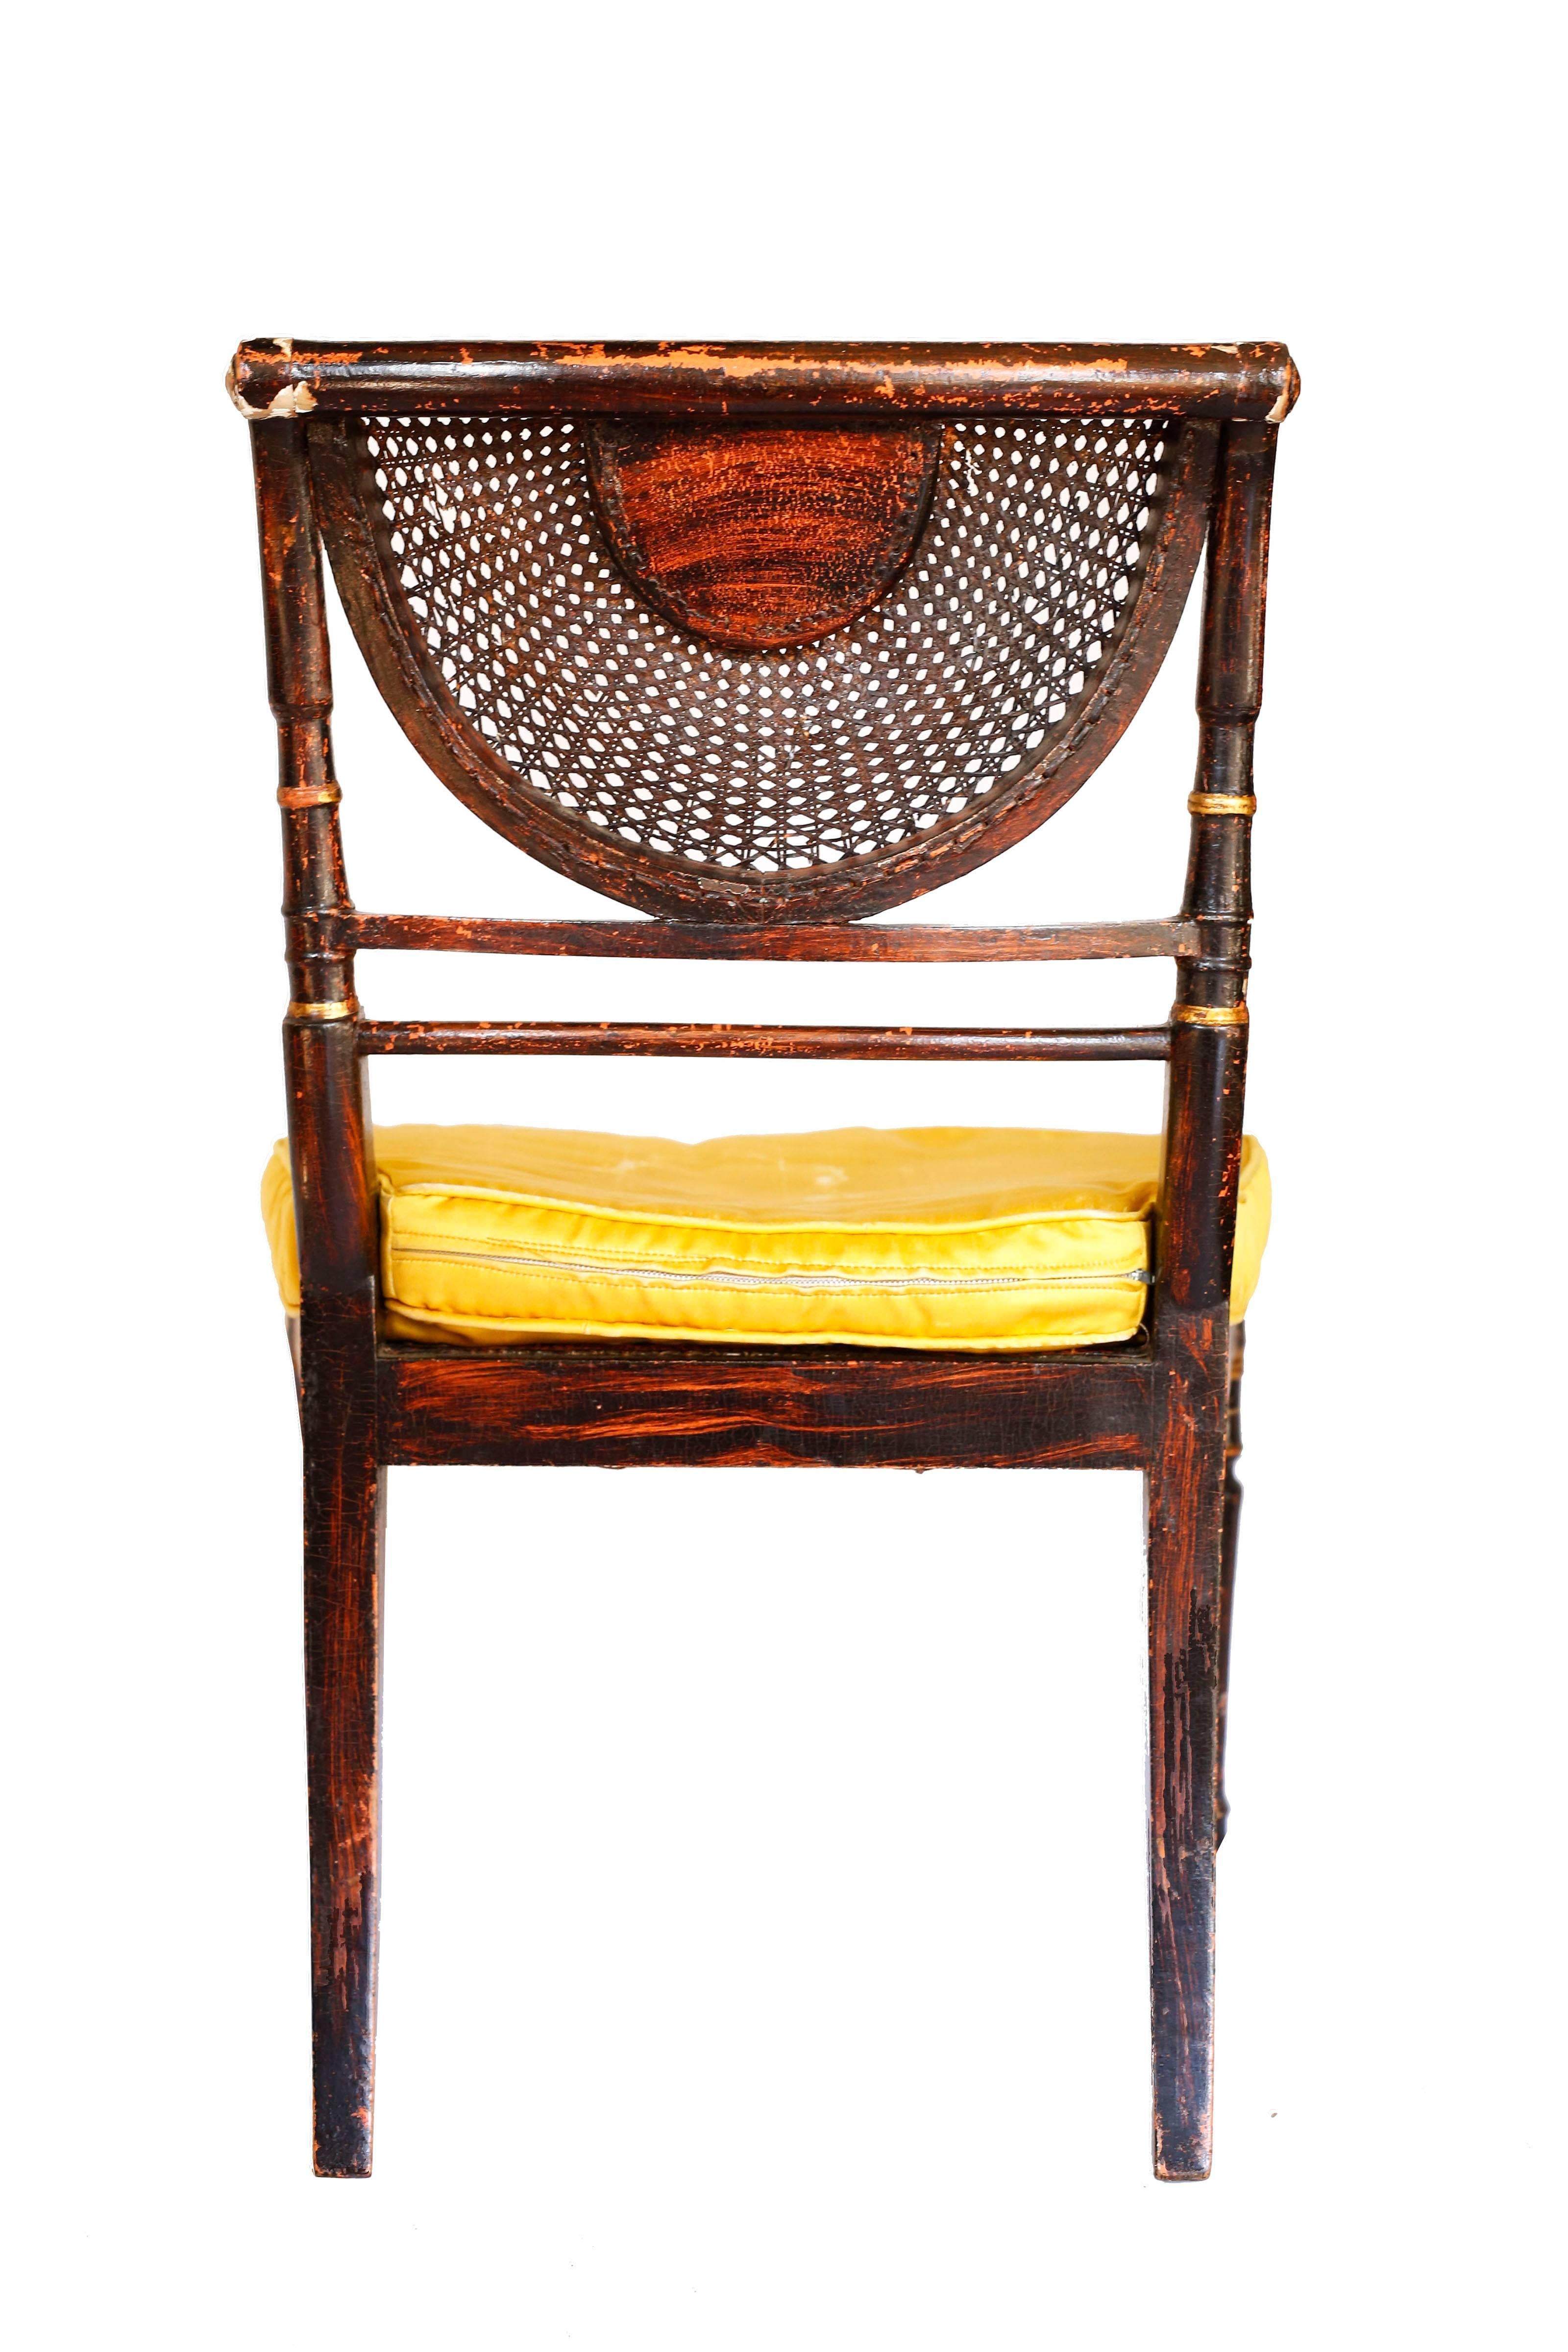 Hepplewhite Early 19th Century Parcel-Gilt Caned Armchair, after Angelica Kauffman